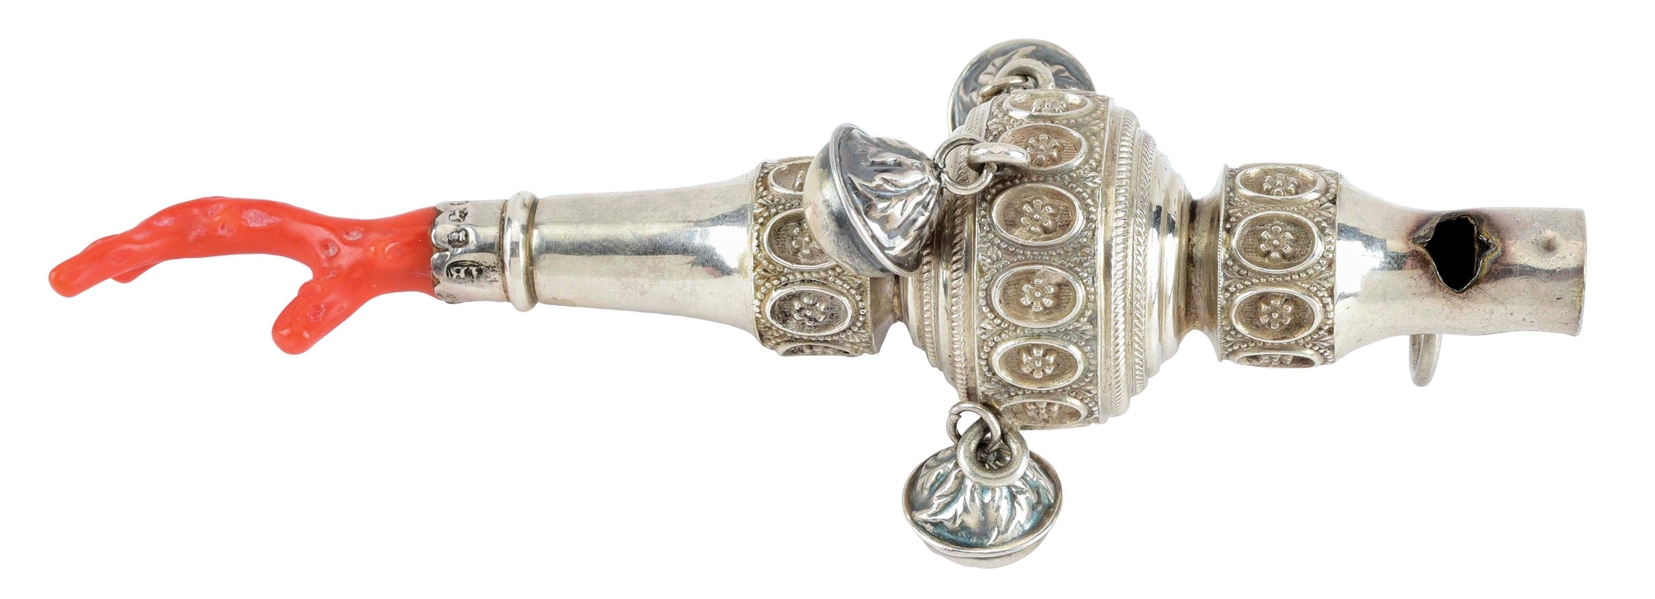 VICTORIAN STERLING SILVER BABY RATTLE MARKED I.B. WITH WHISTLE AND CORAL TEETHING HANDLE.